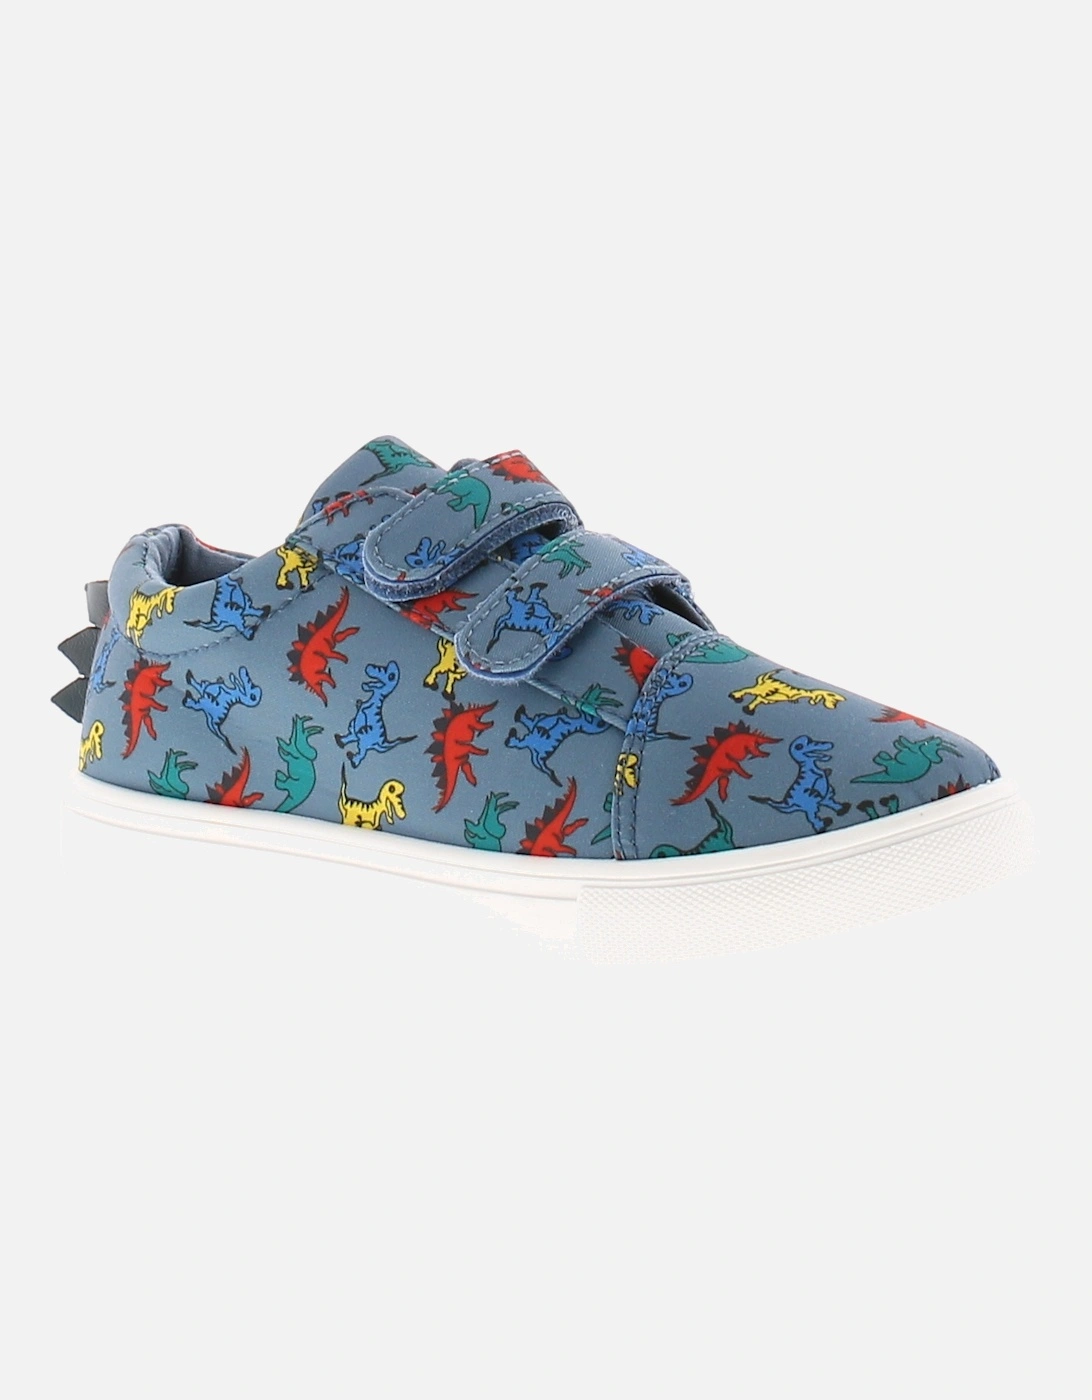 Younger Childrens Shoes Canvas Deano blue UK Size, 6 of 5